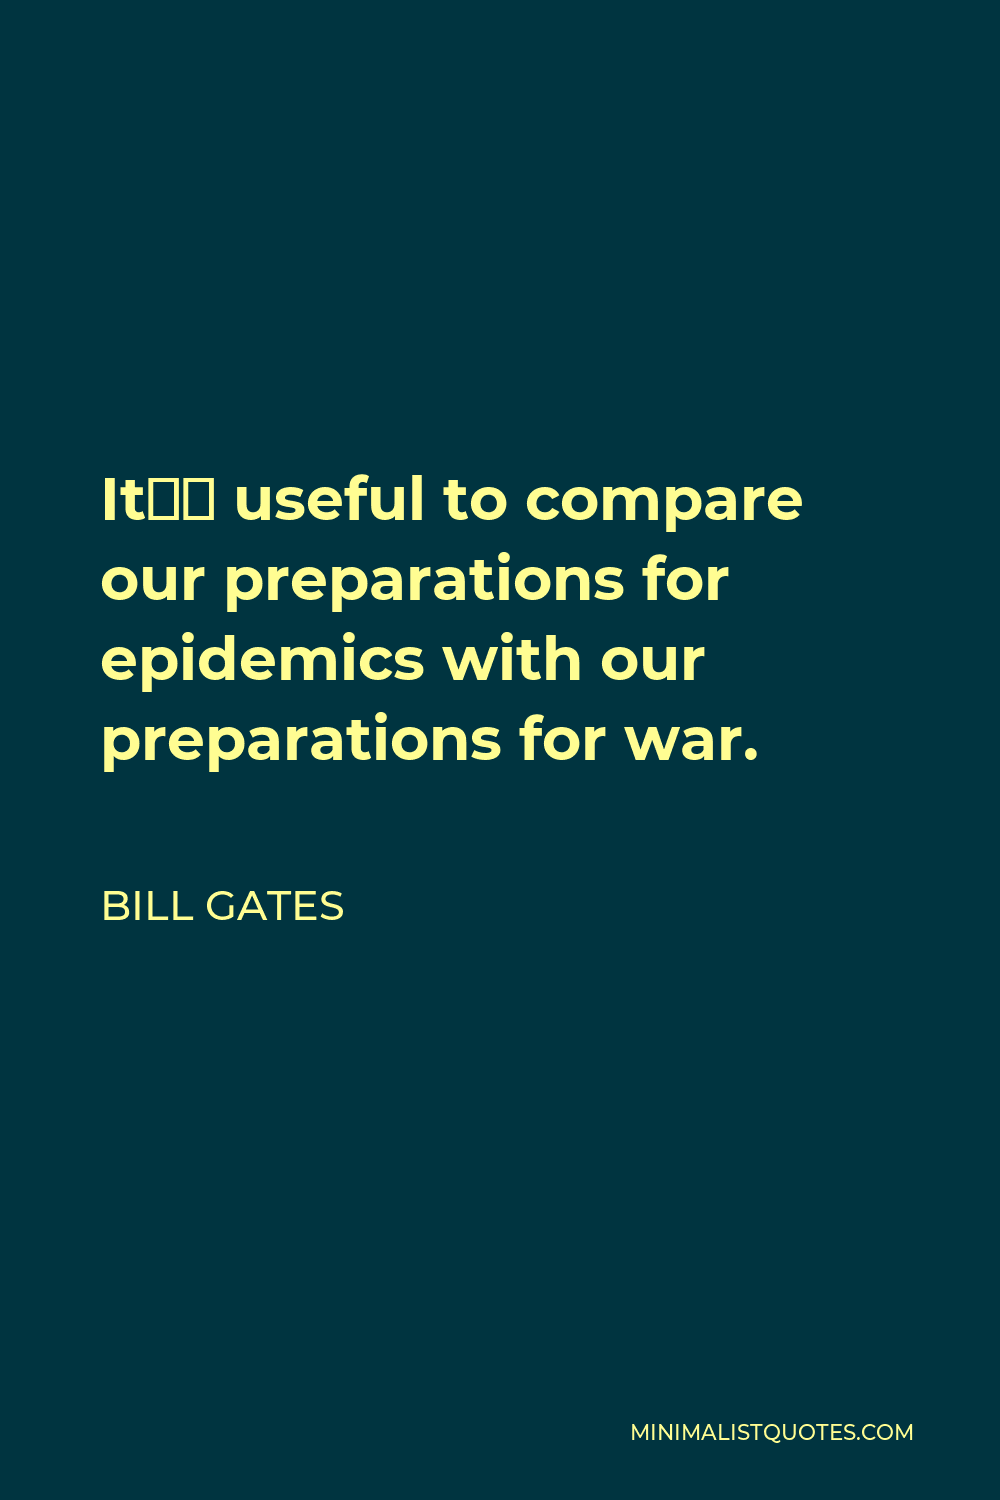 Bill Gates Quote - It’s useful to compare our preparations for epidemics with our preparations for war.